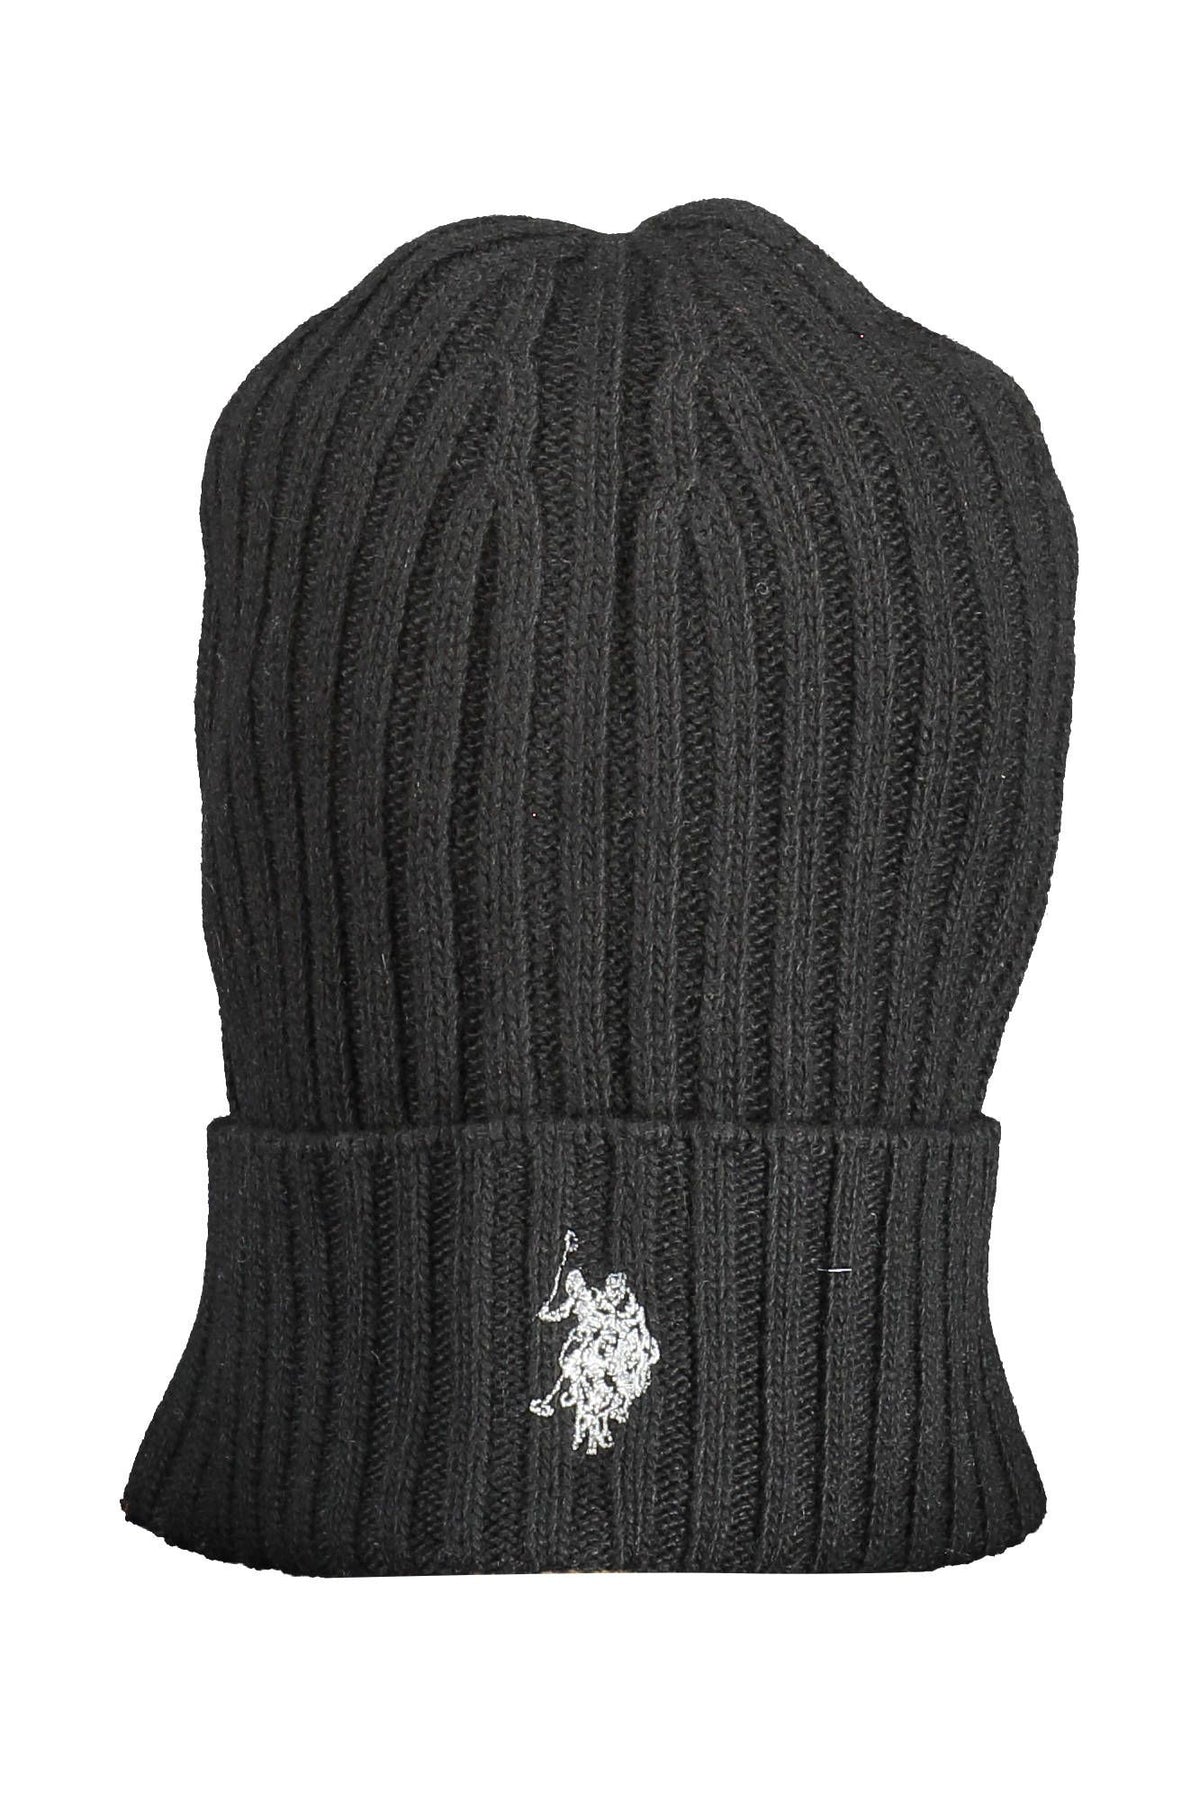 U.S. POLO ASSN. Elegant Embroidered Wool Cap